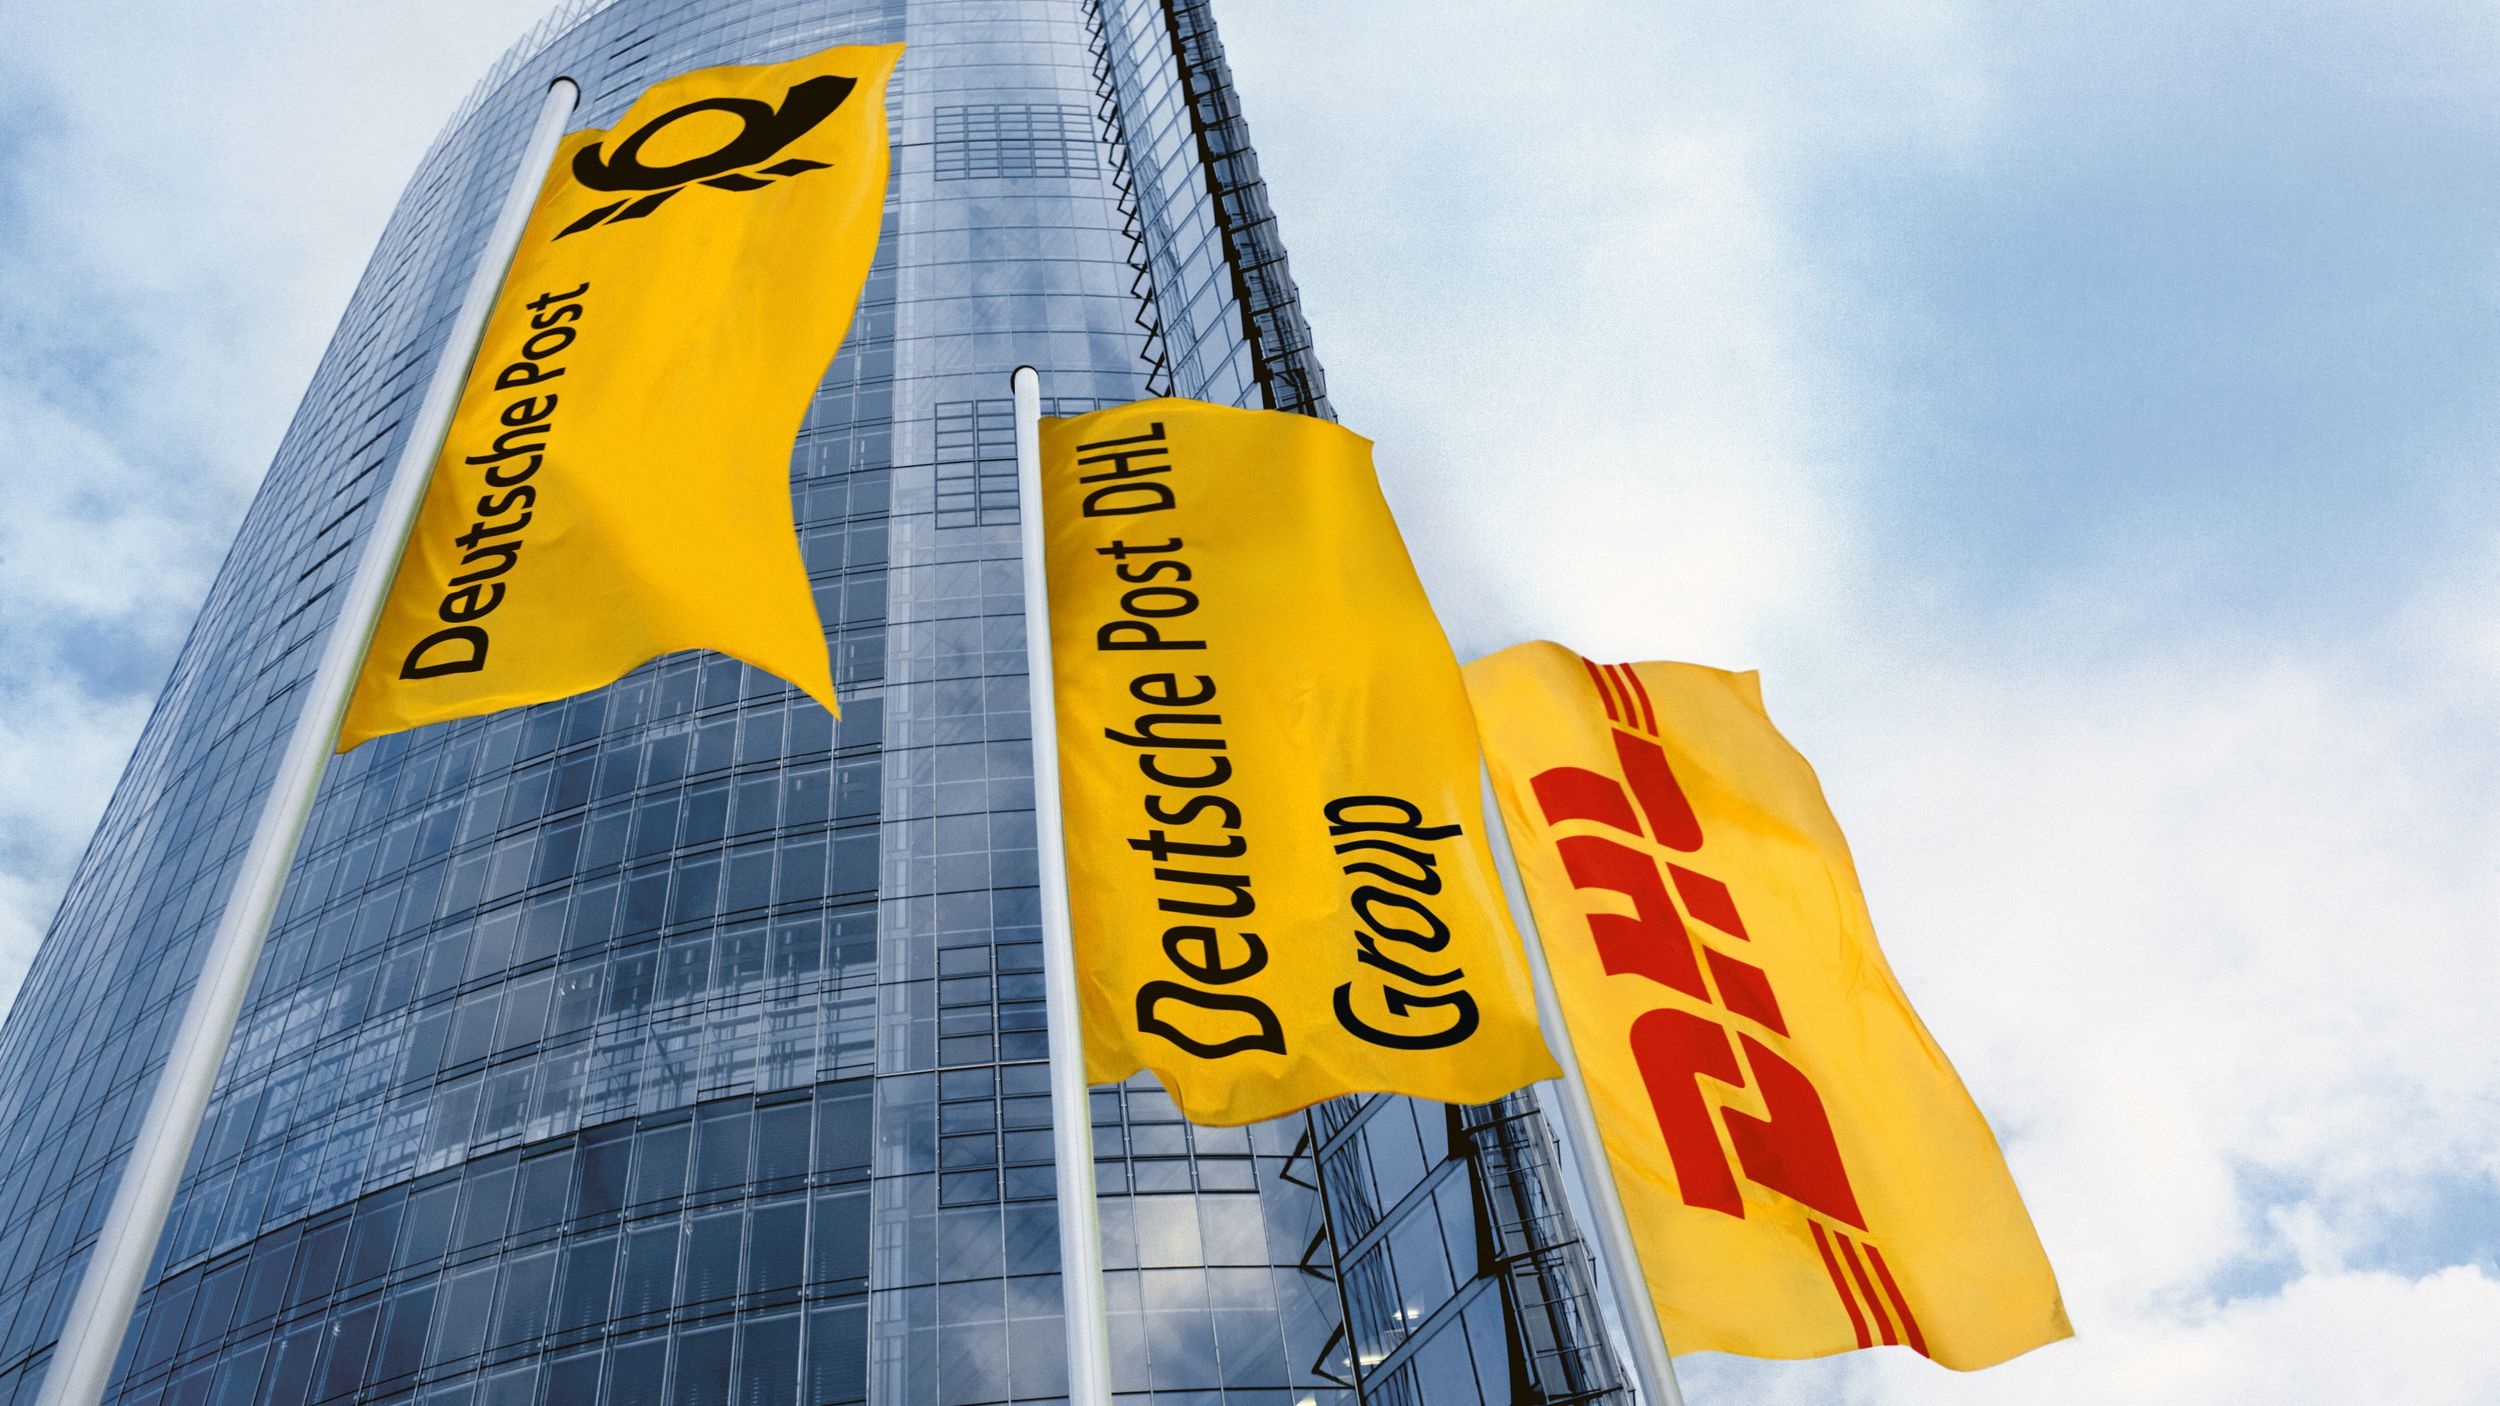 DHL: The global leader in the logistics industry, International shipping. 2500x1410 HD Wallpaper.